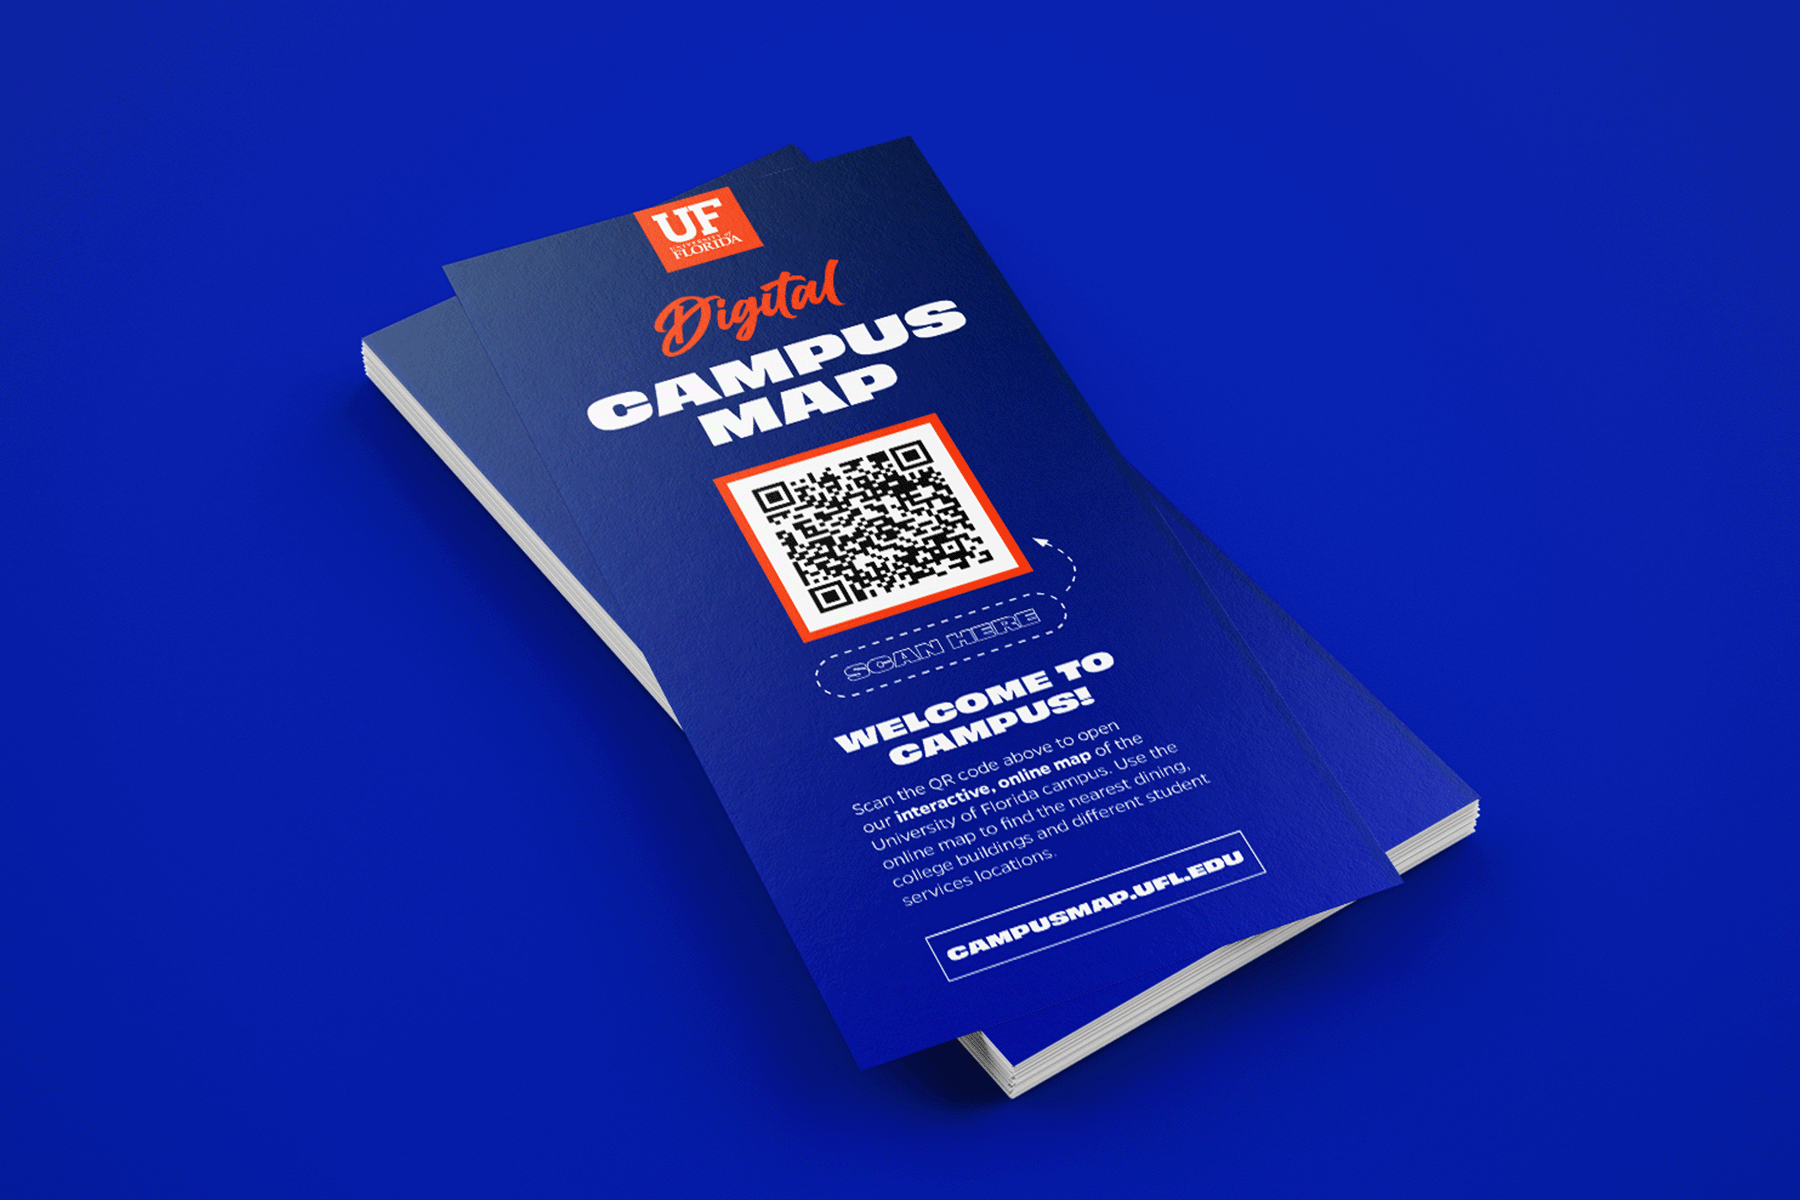 A handout campus map flyer with a QR code on the front and instructions on how to use the QR code.